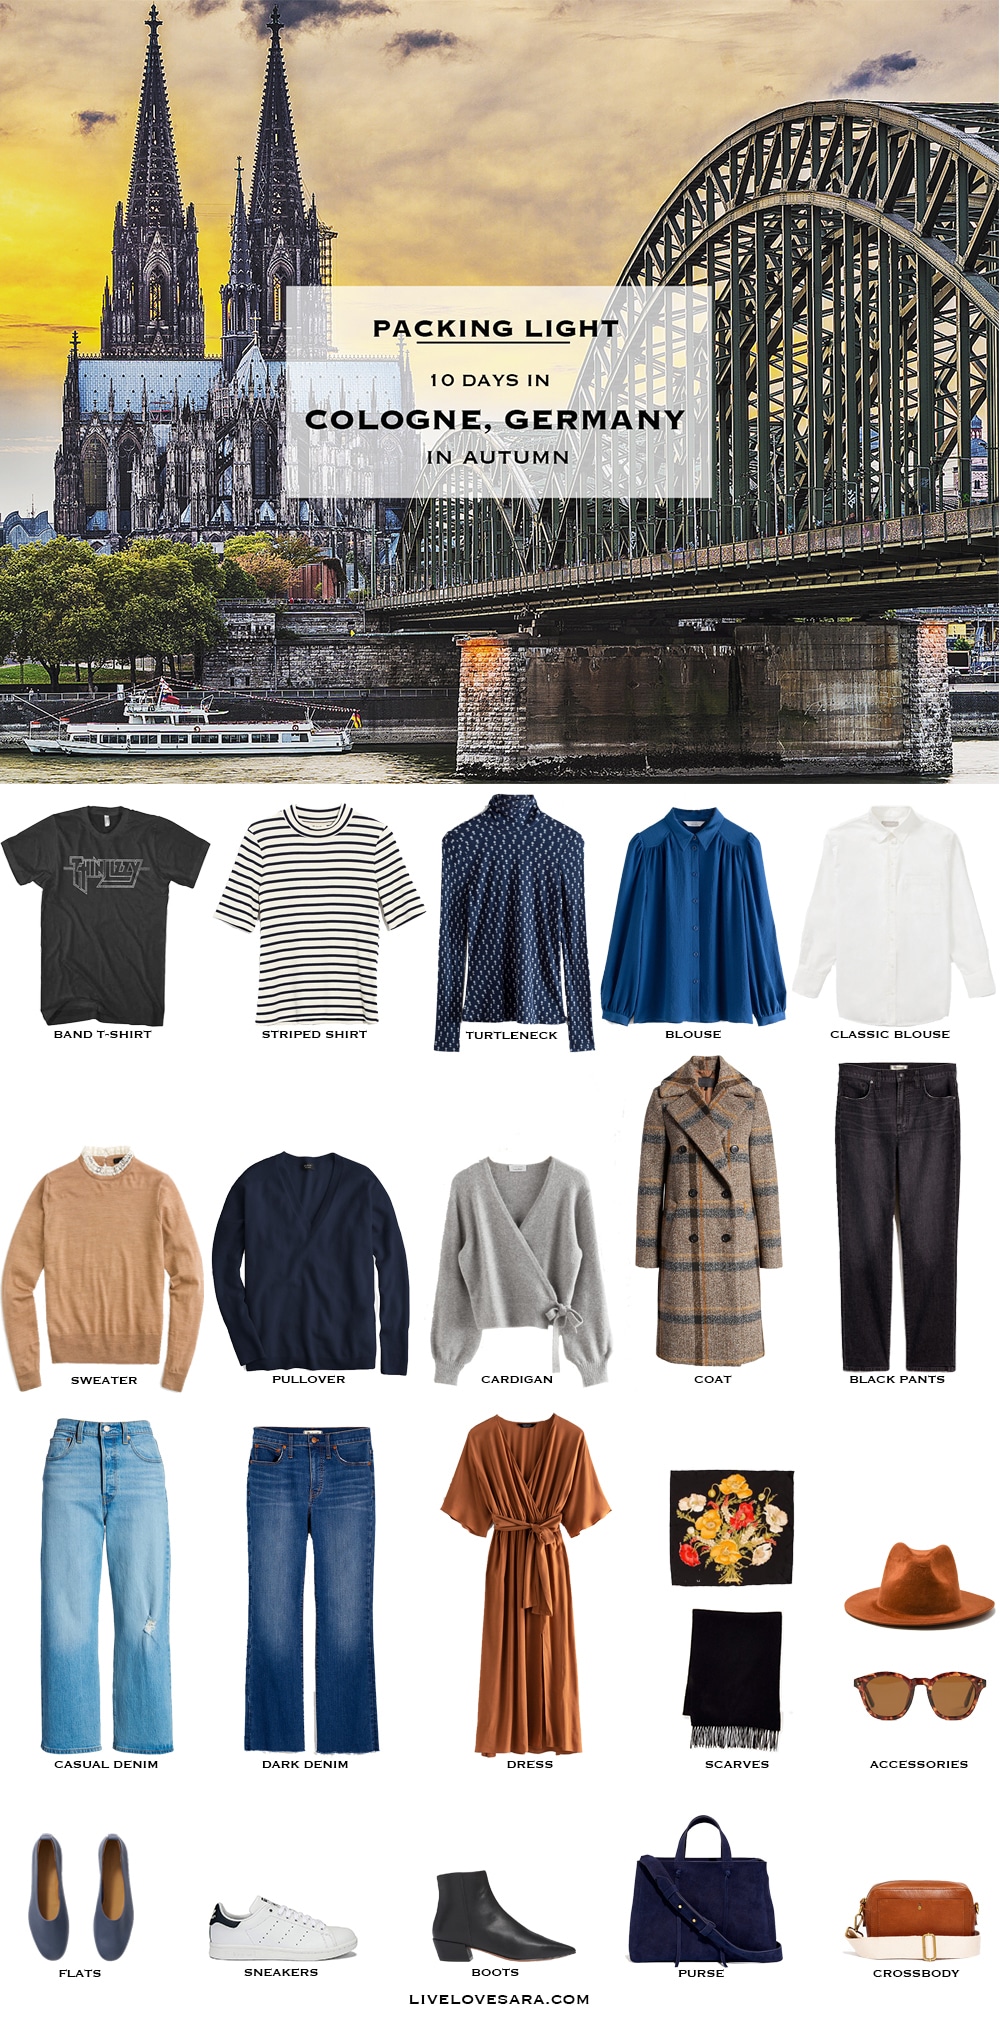 What to Pack for a 10 days in Cologne Germany Packing Light List